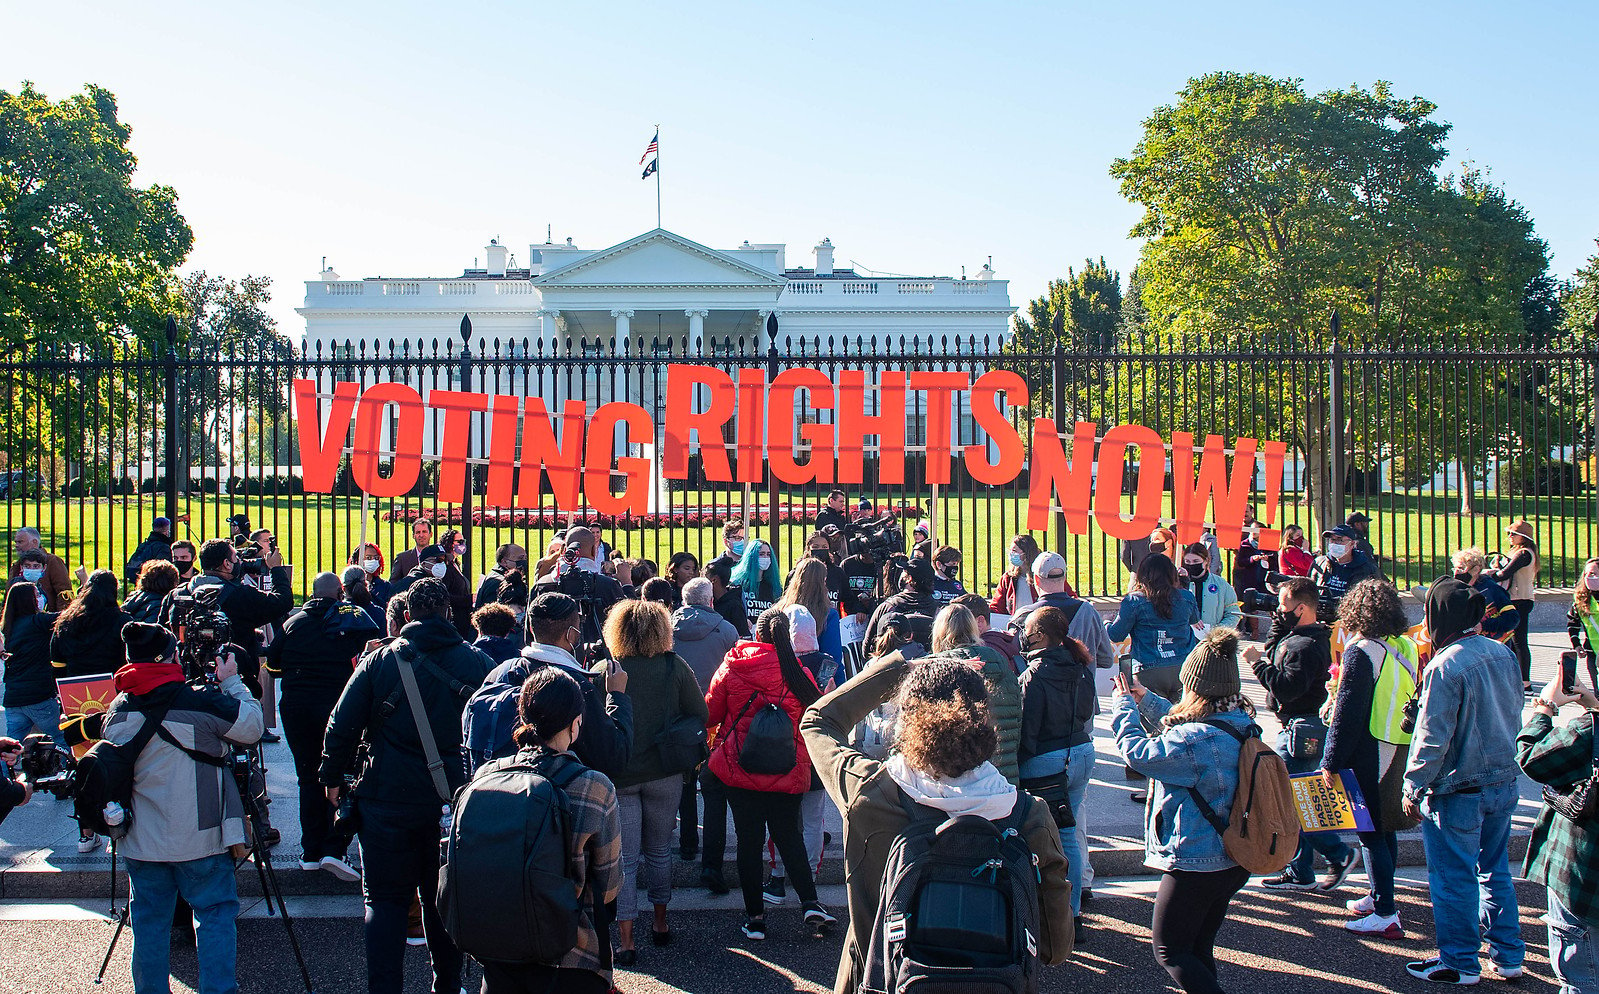 Signs that say "Voting Rights Now" in front of the White House